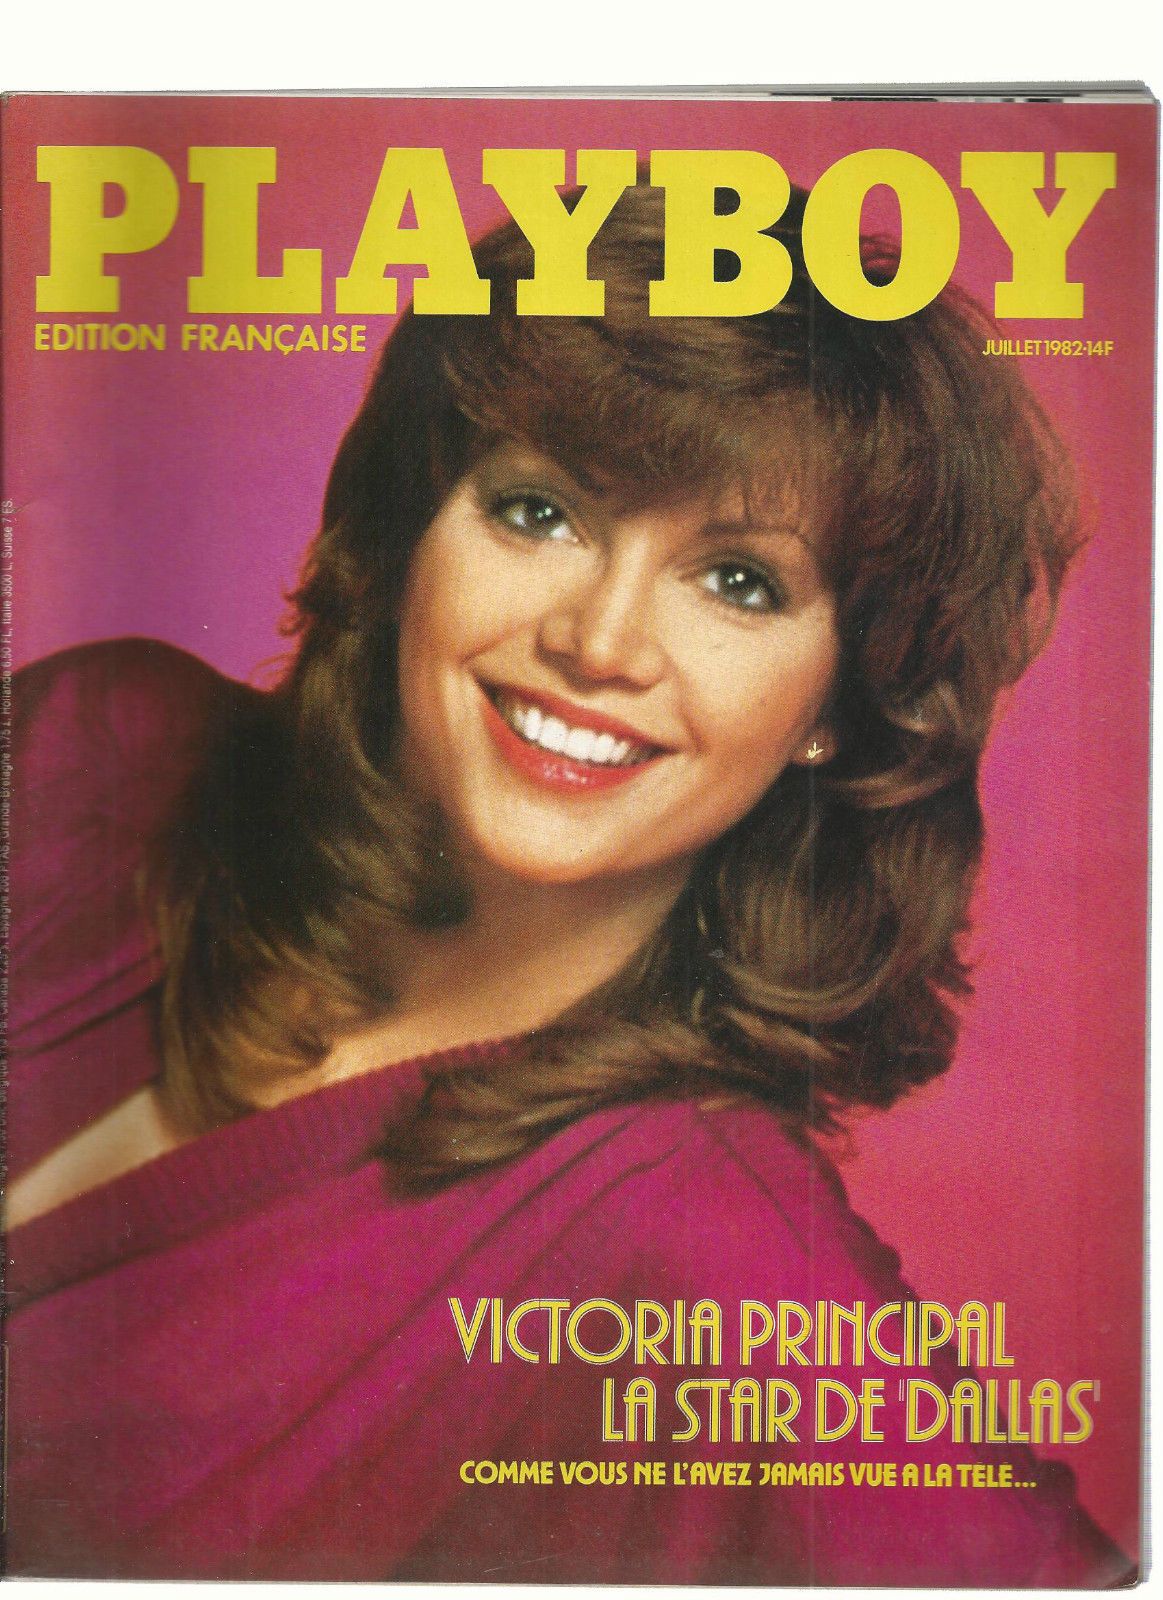 christopher jenner recommends victoria principal playboy photos pic